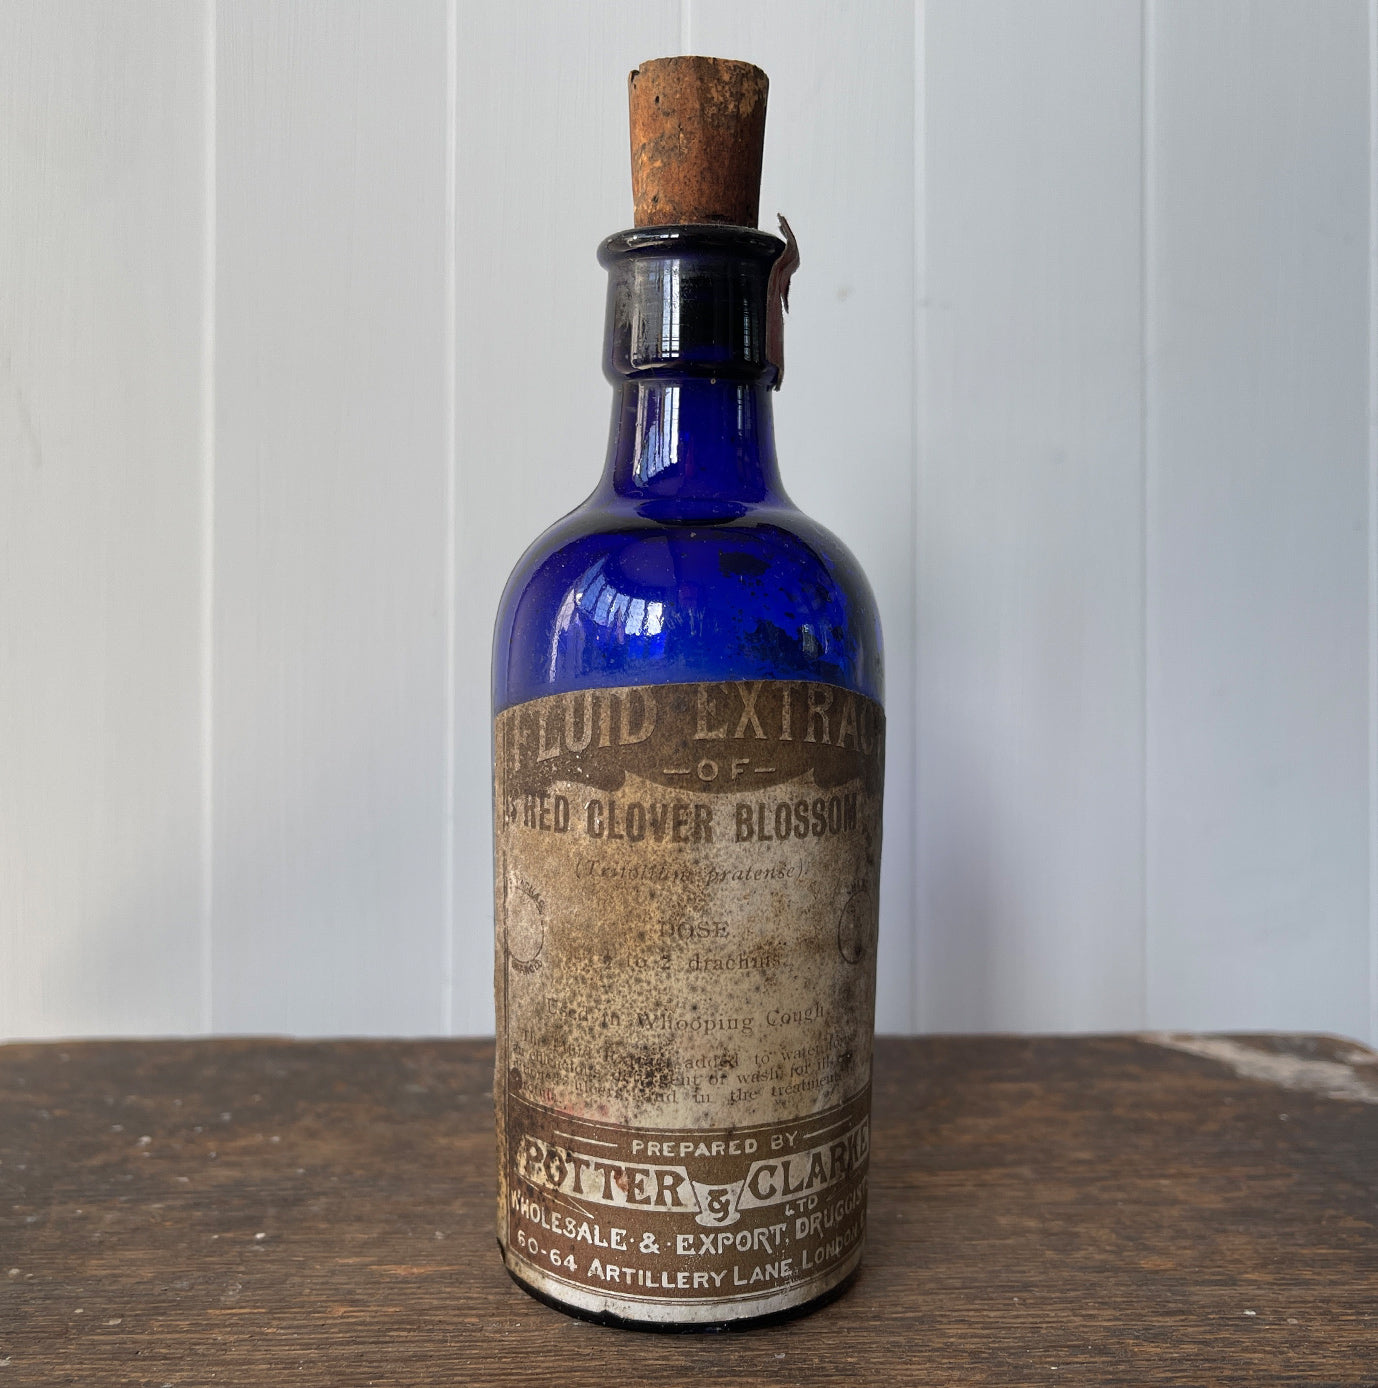 A Vintage Apothecary blue bottle with cork stopper for Red Clover Blossom. These bottles look great displayed in the bathroom or in a curio cabinet - SHOP NOW - www.intovintage.co.uk